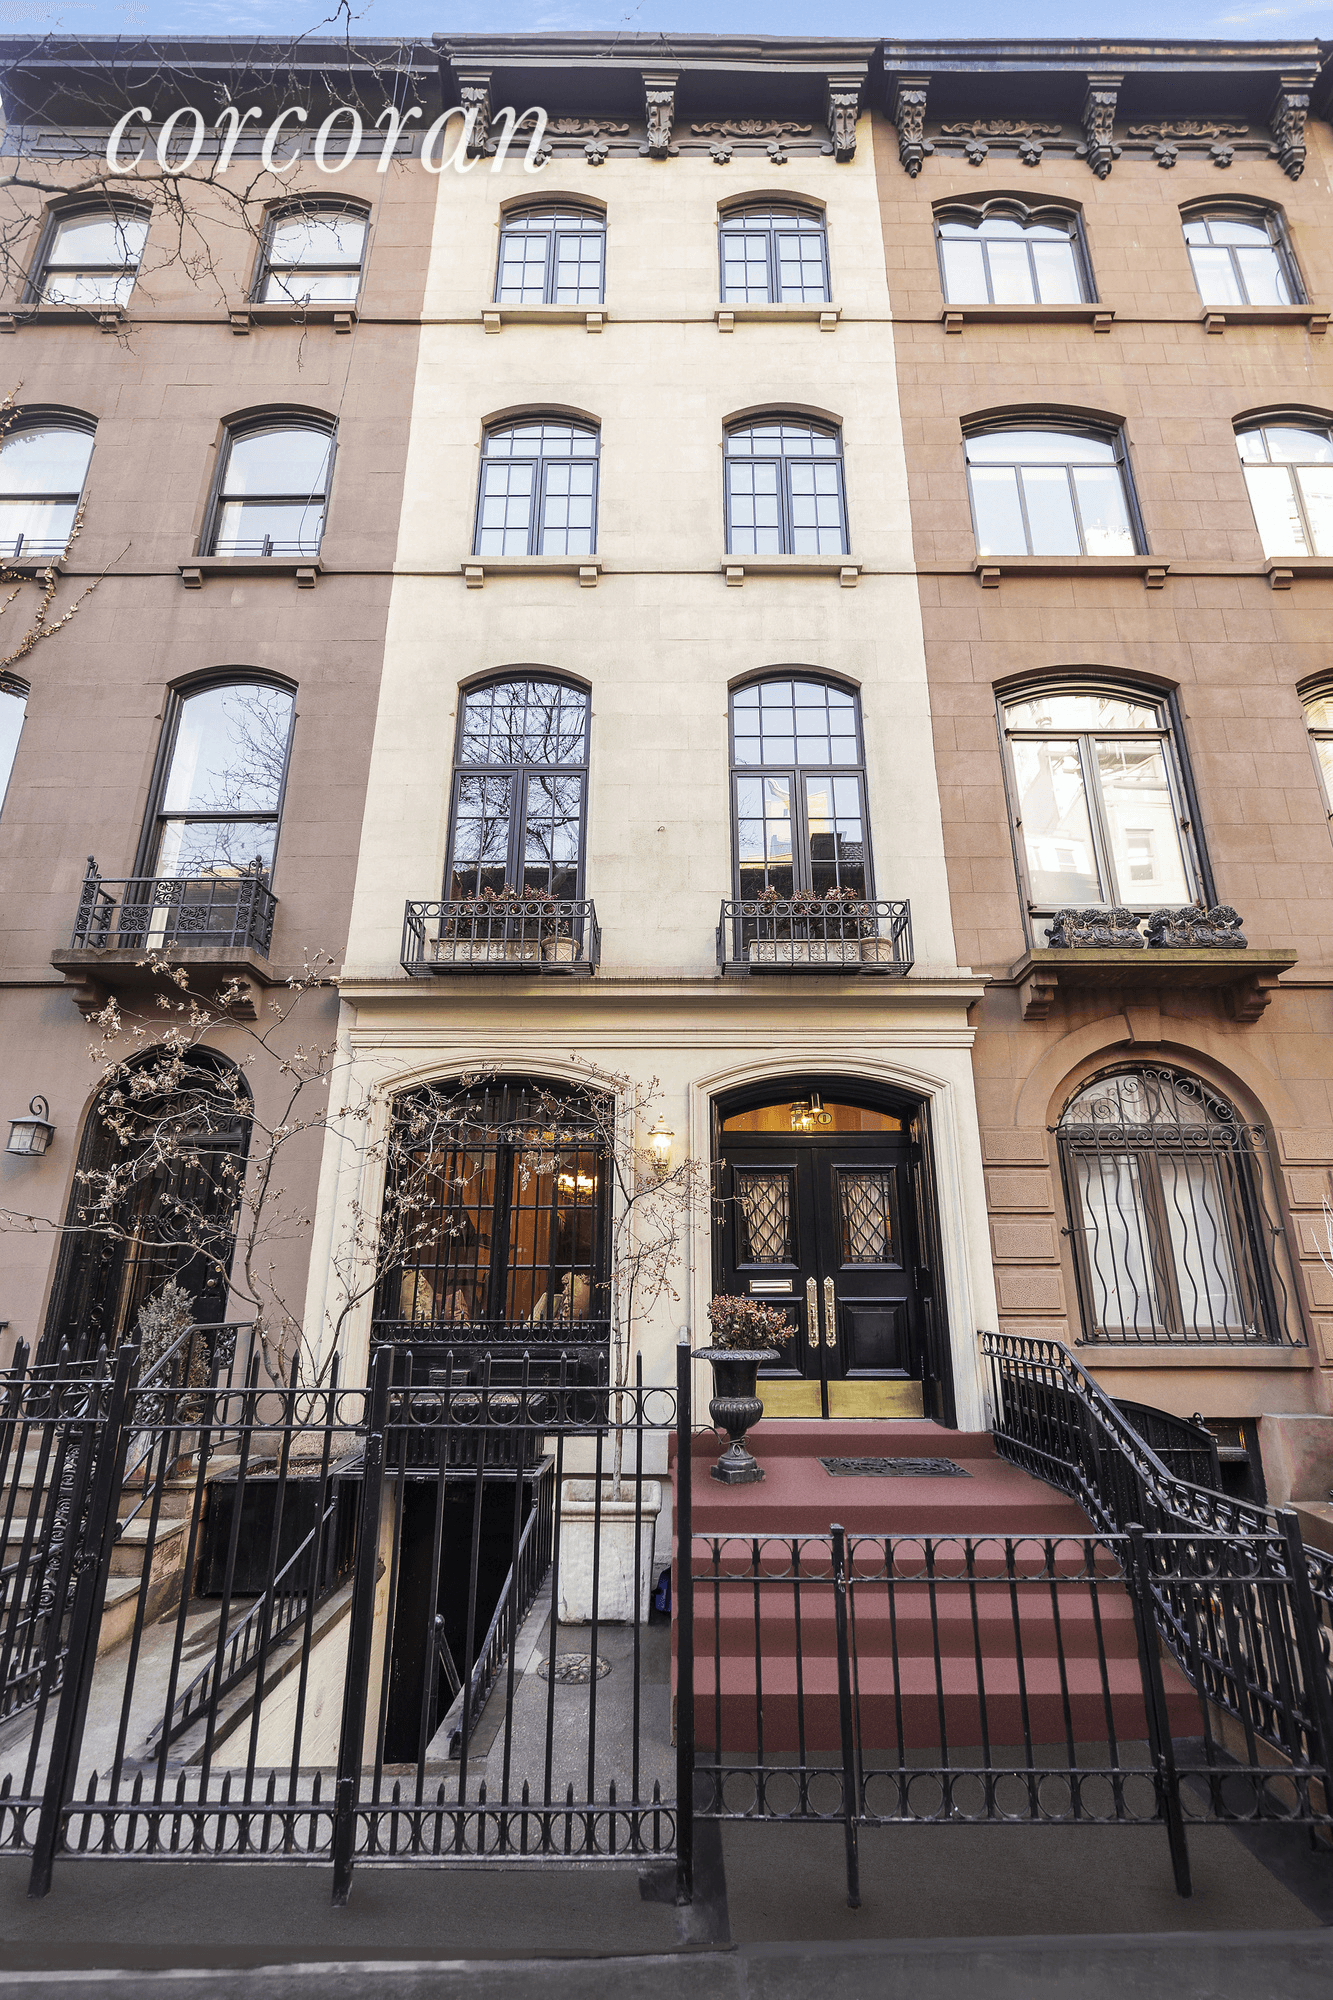 The Trevira House in Murray Hill was commissioned by Abraham Lincolns son as a wedding present for his daughter.